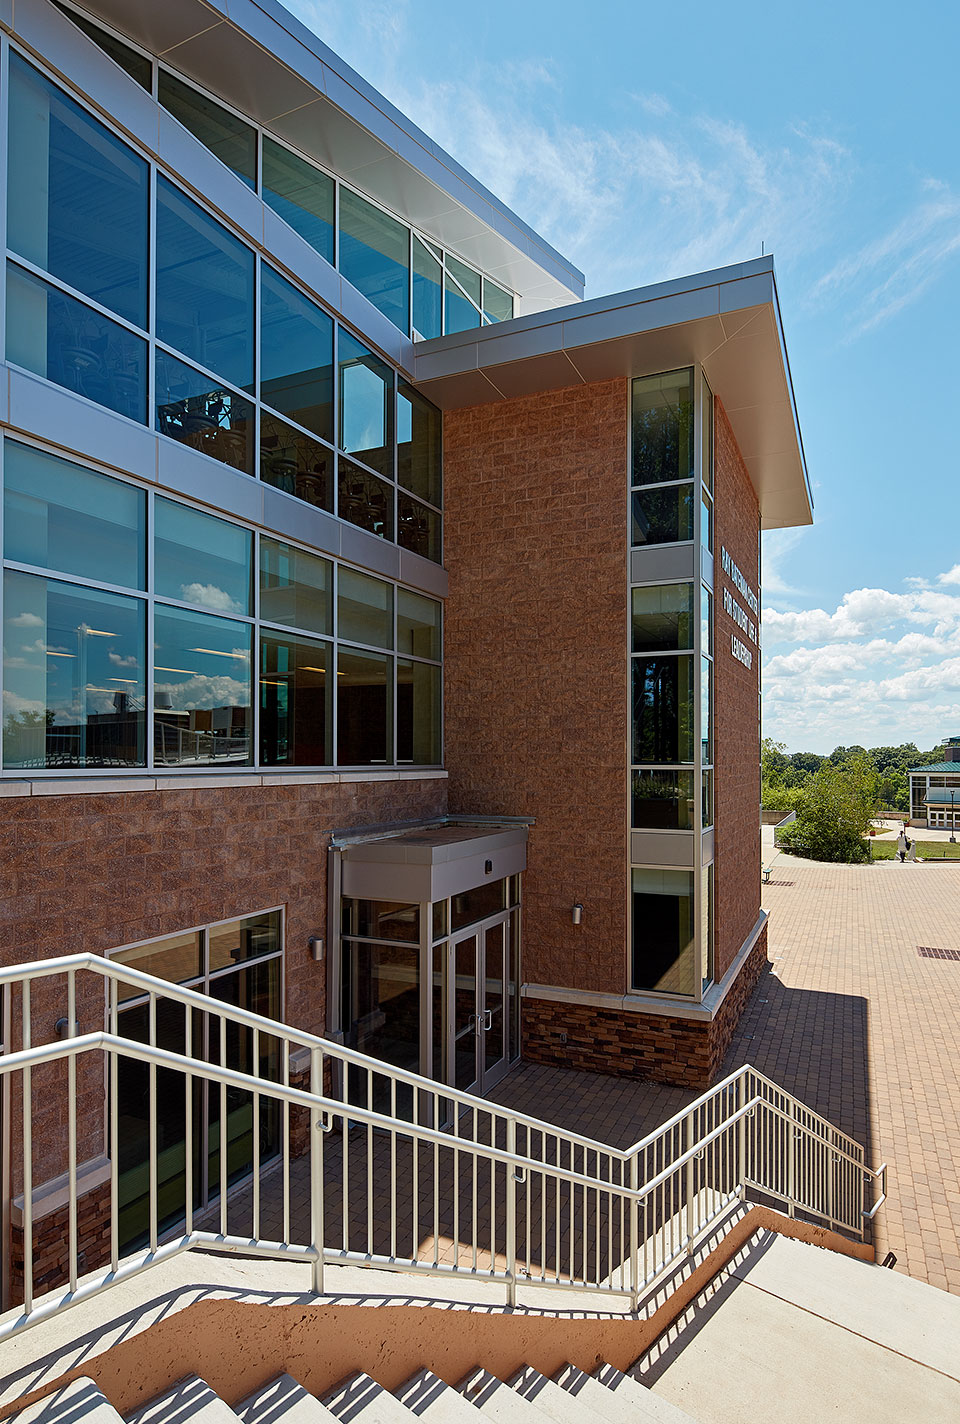 Raritan Valley Community College's newest building, the Ray Bateman Center for Student Life and Leadership, meets LEED standards and helped the school secure a 2016 Green Ribbon School designation from the U.S. Department of Education. June, 2016.